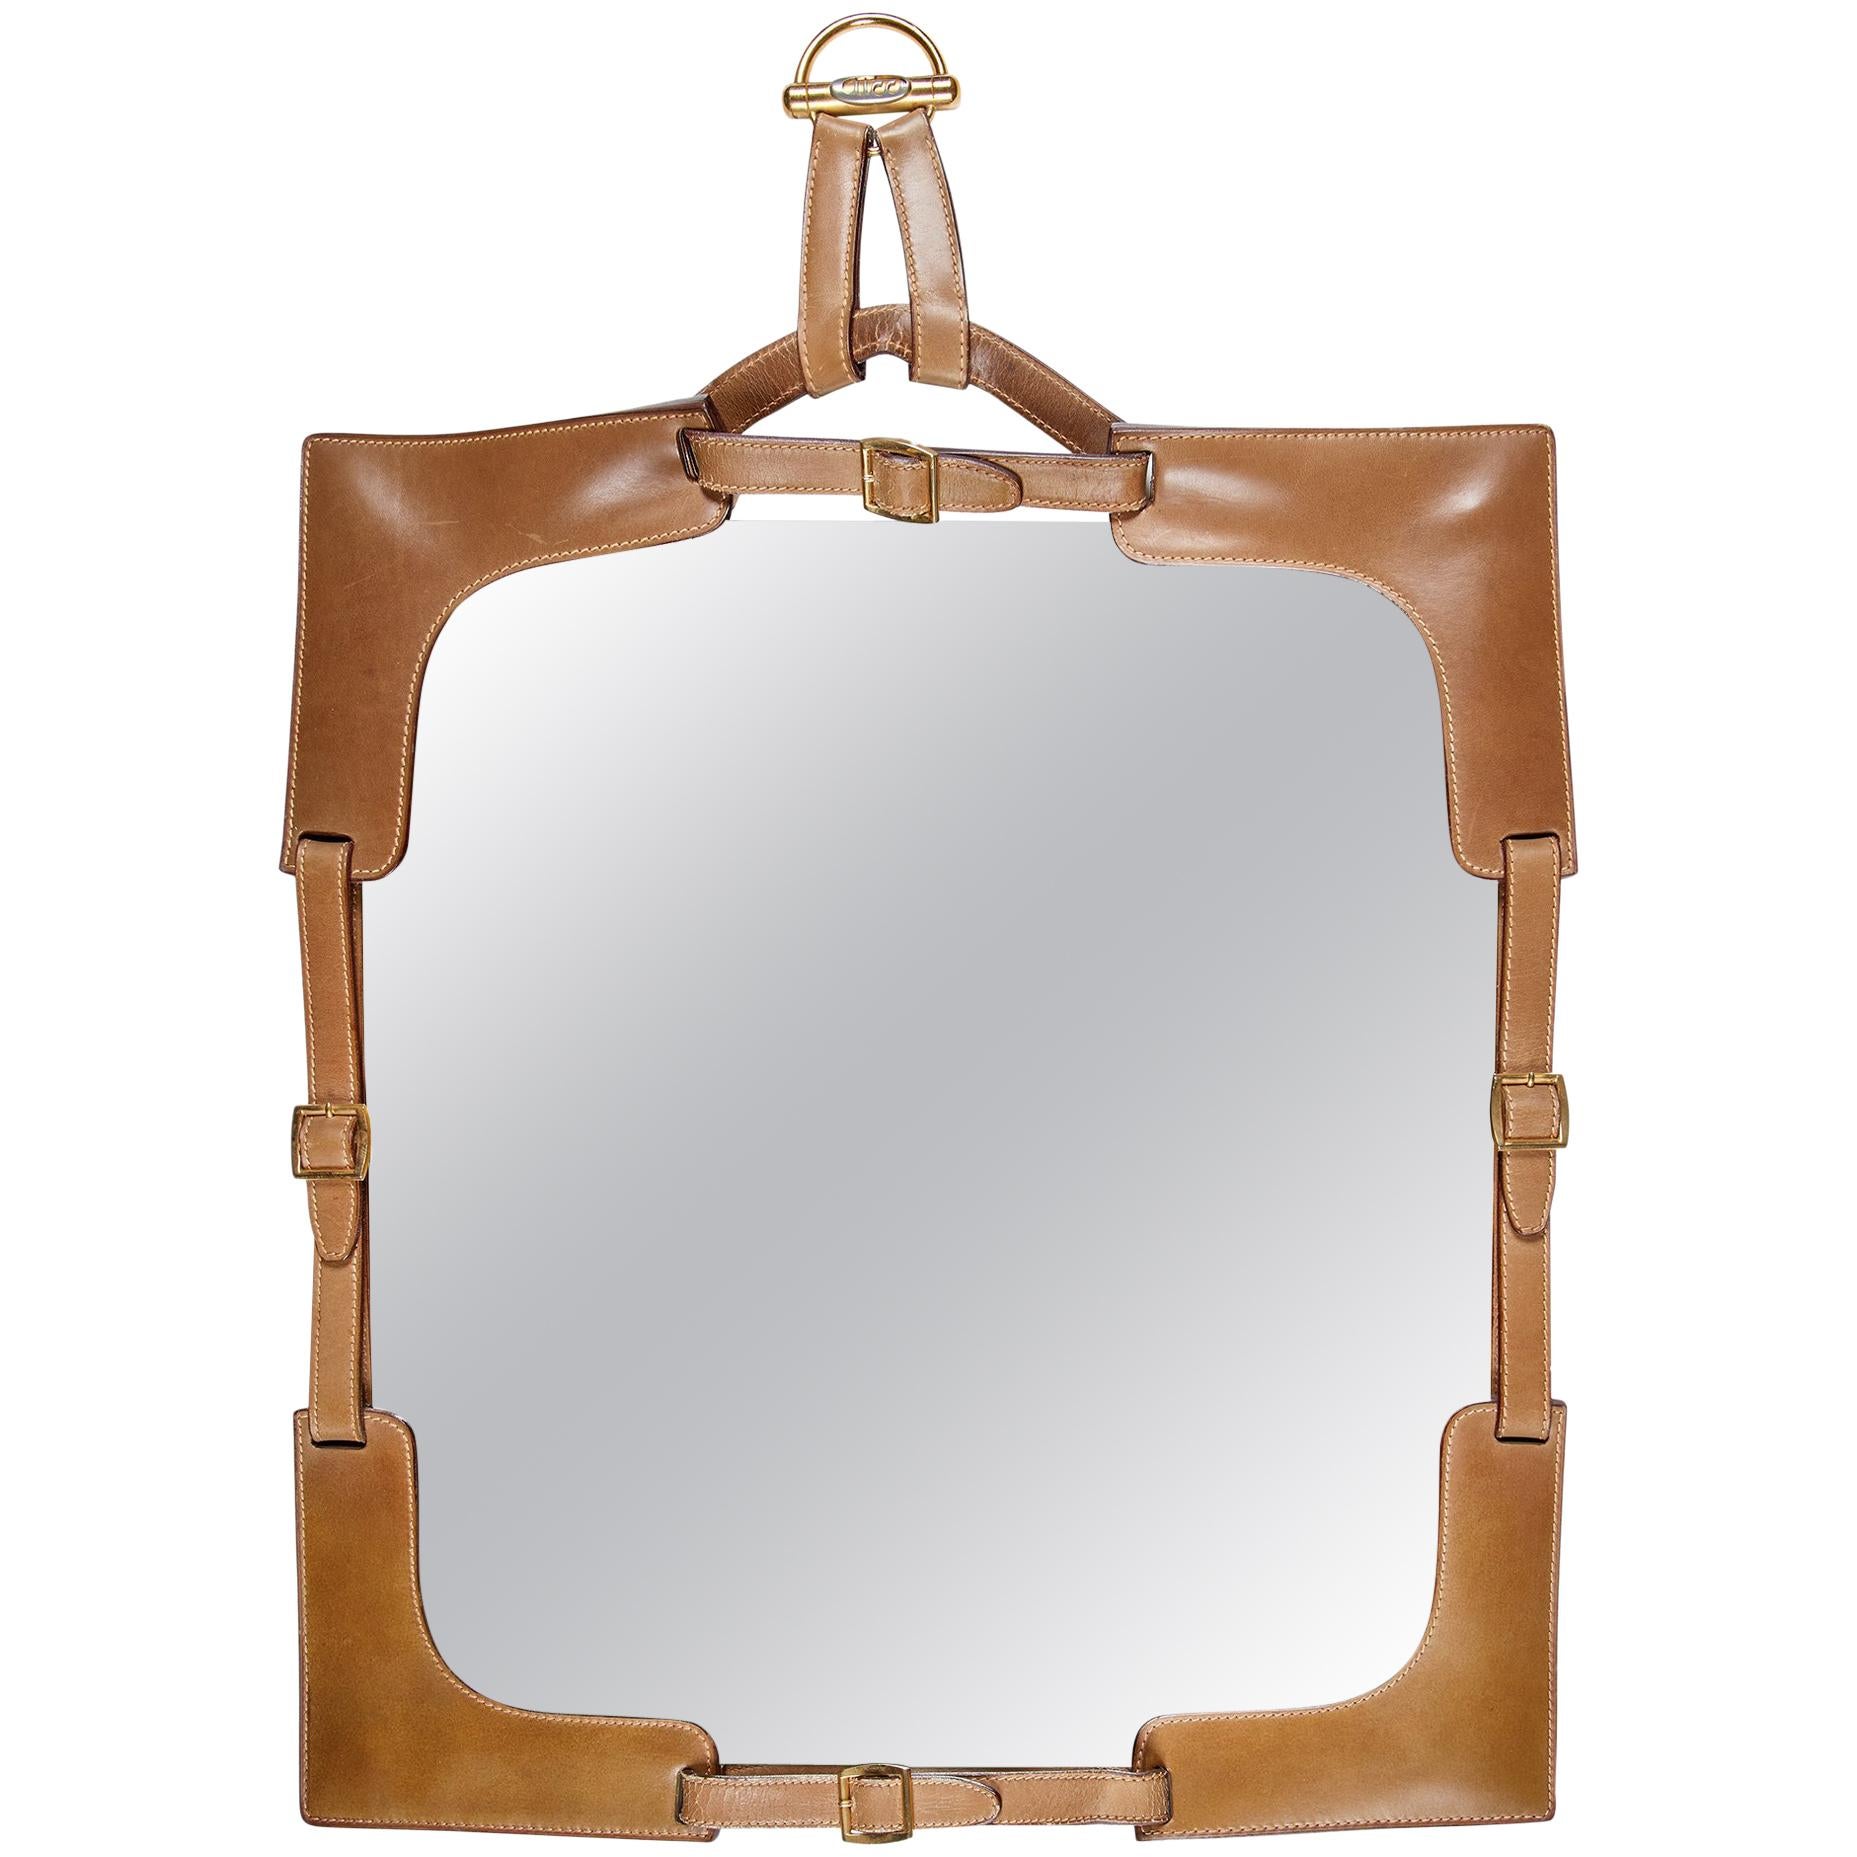 1970s Gucci Leather Framed Mirror For Sale